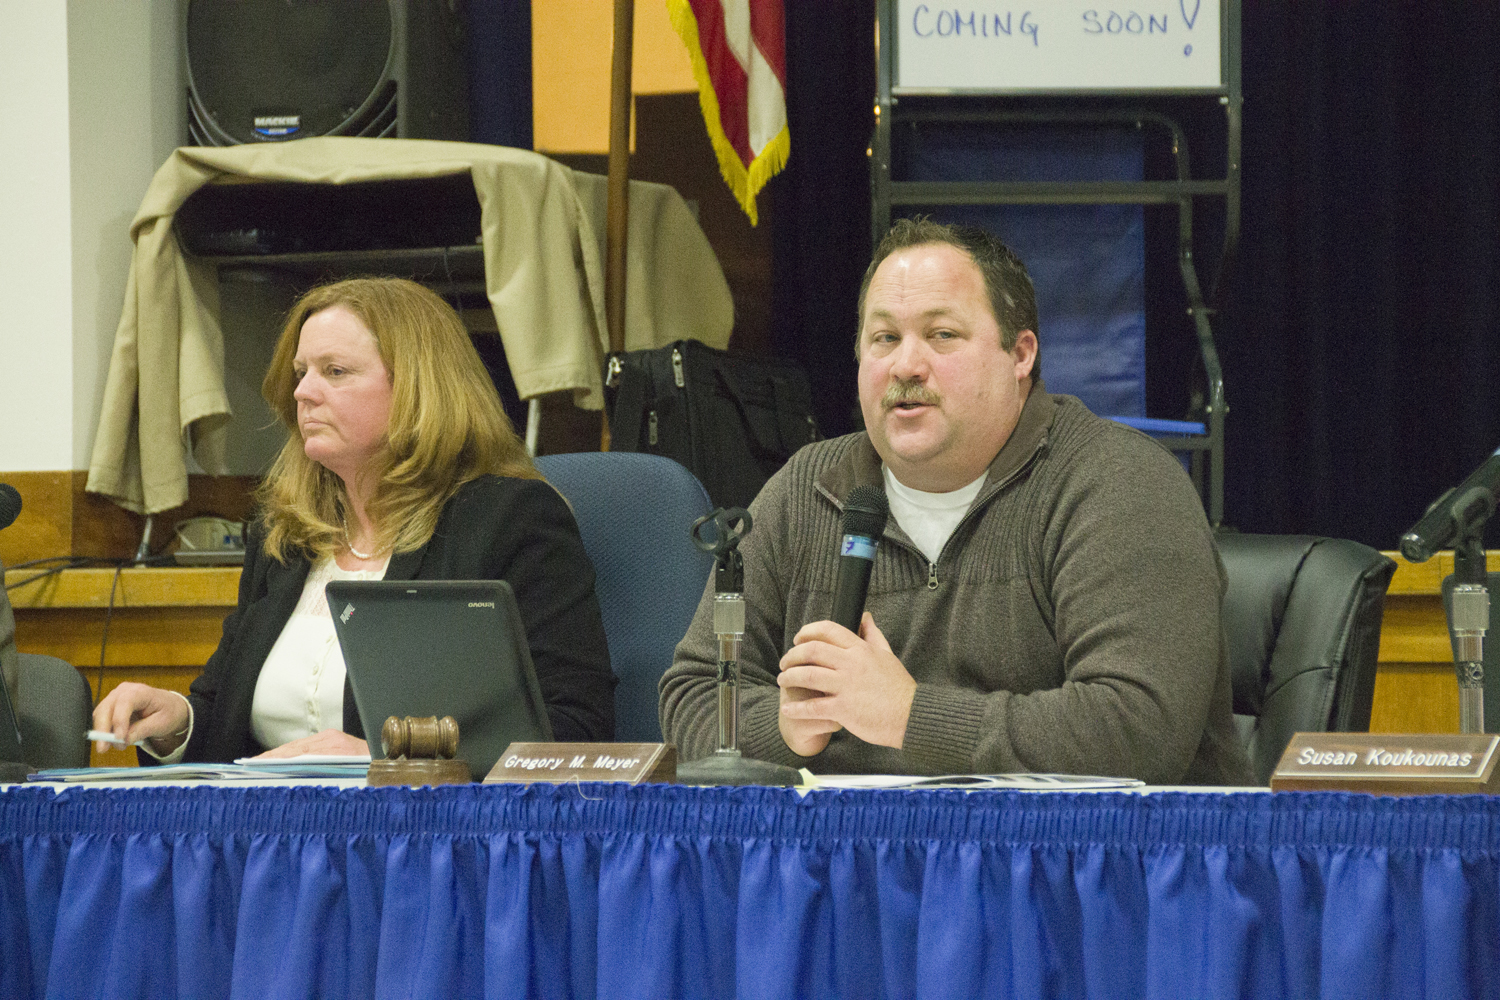 School board president Greg Meyer said Tuesday night that the district will have to review its selective classification policy before moving forward. (Credit: Paul Squire)